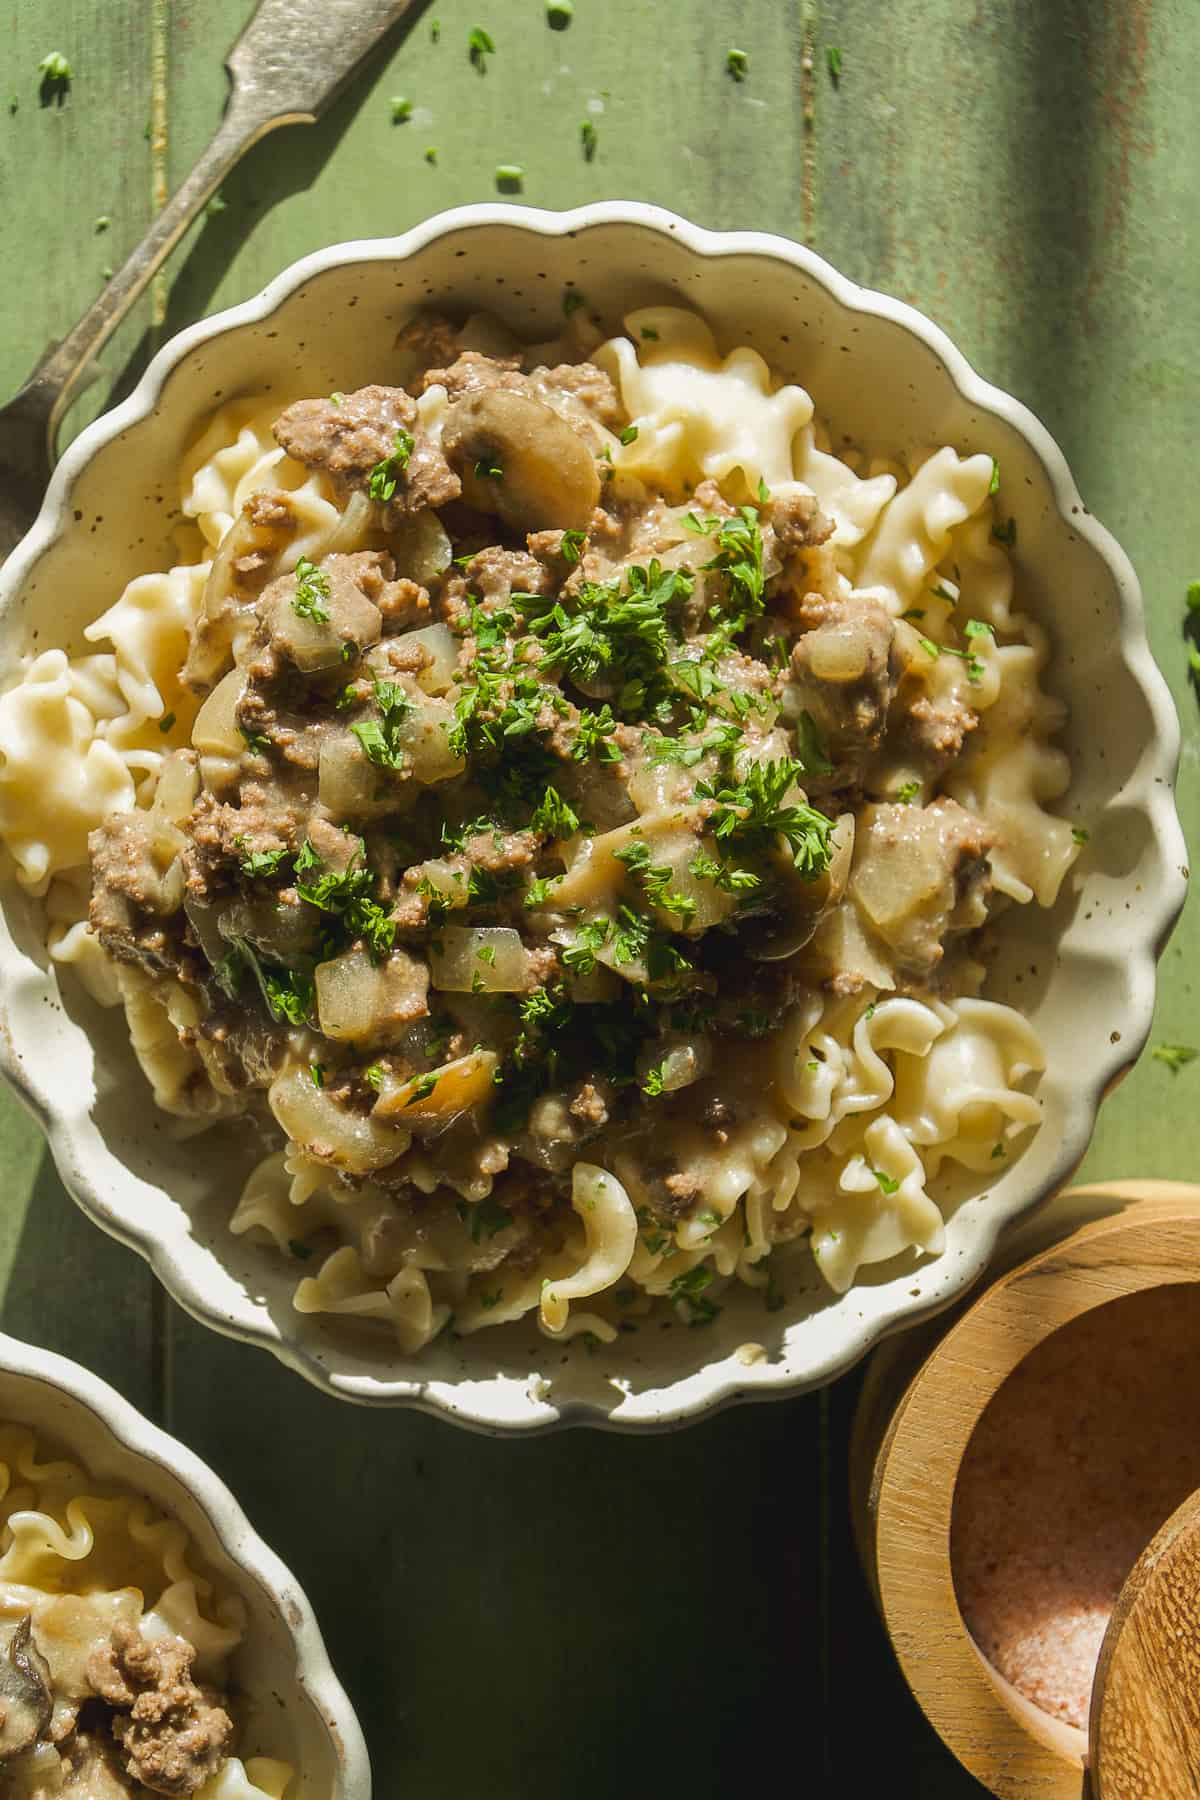 Beef stroganoff on top of pasta noodles in a bowl with a fork.